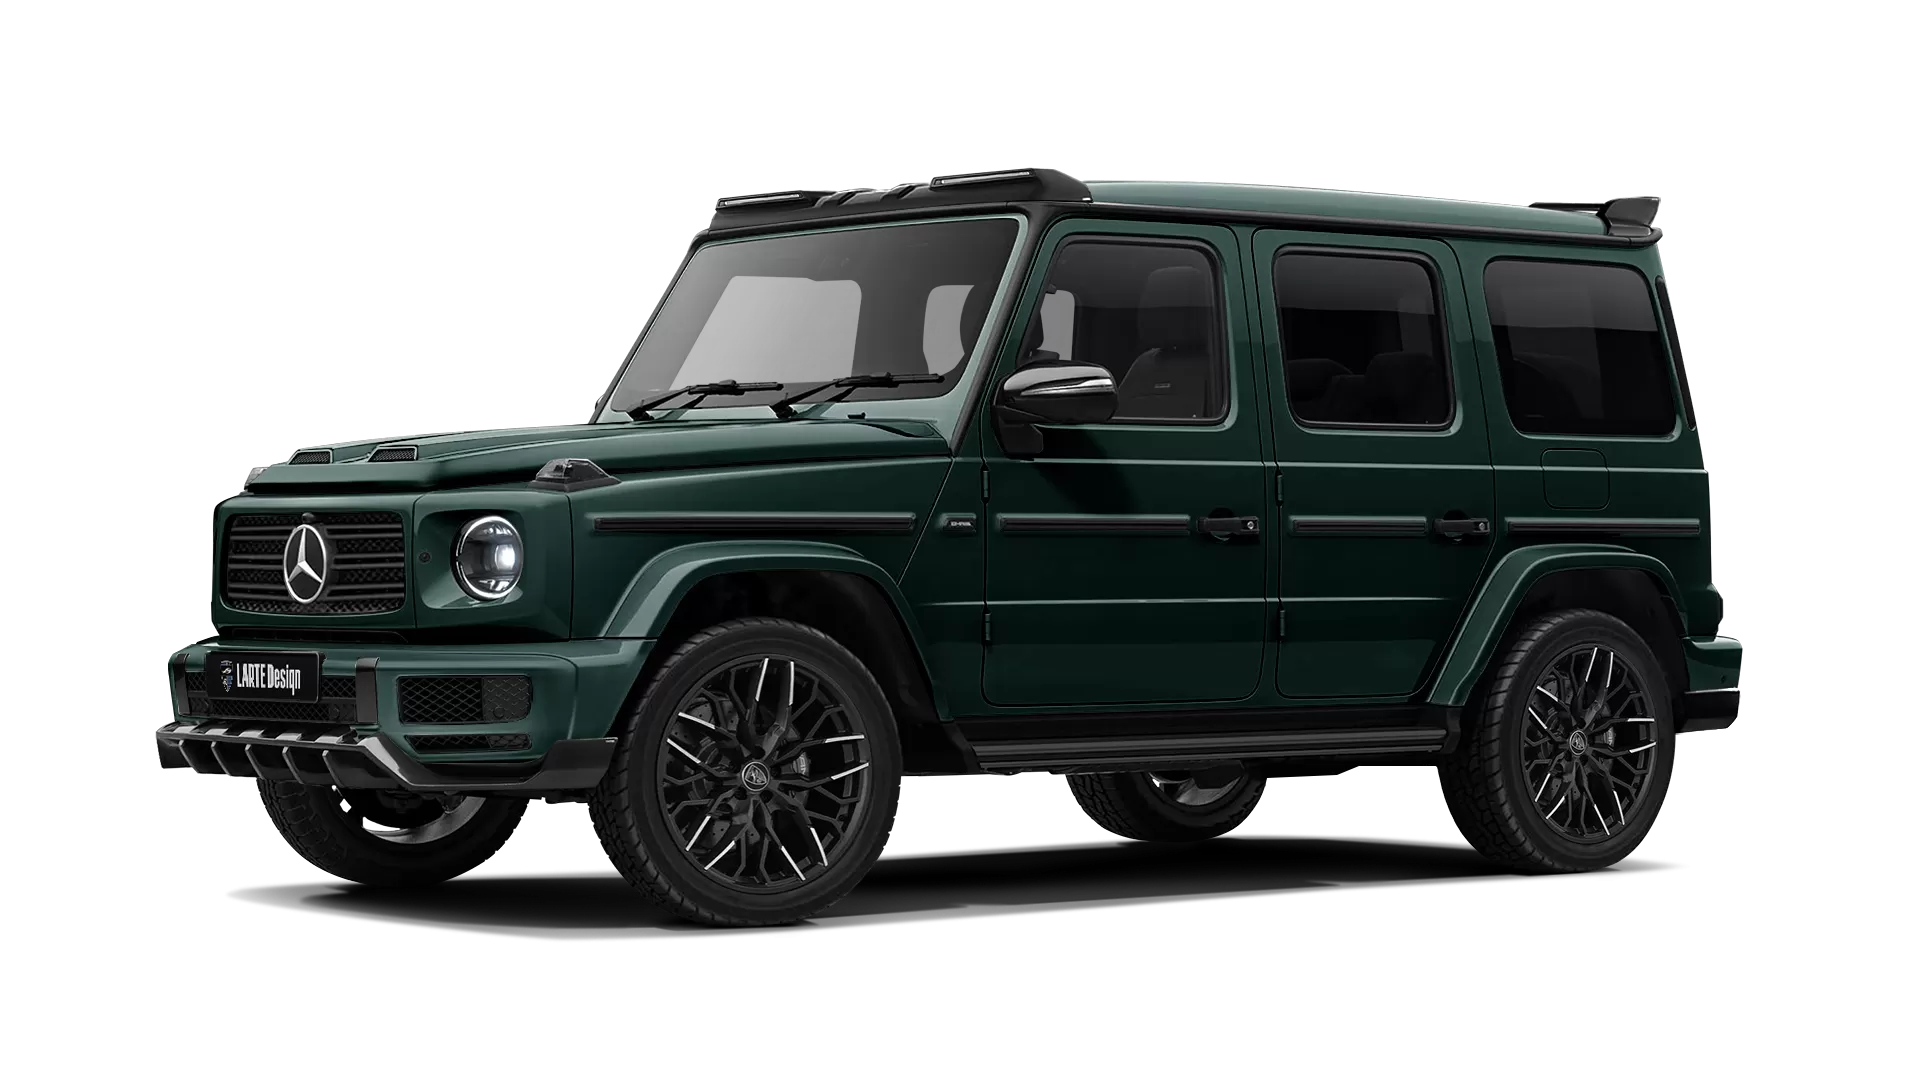 Mercedes G class W463 with painted body kit: front view shown in Emerald Green